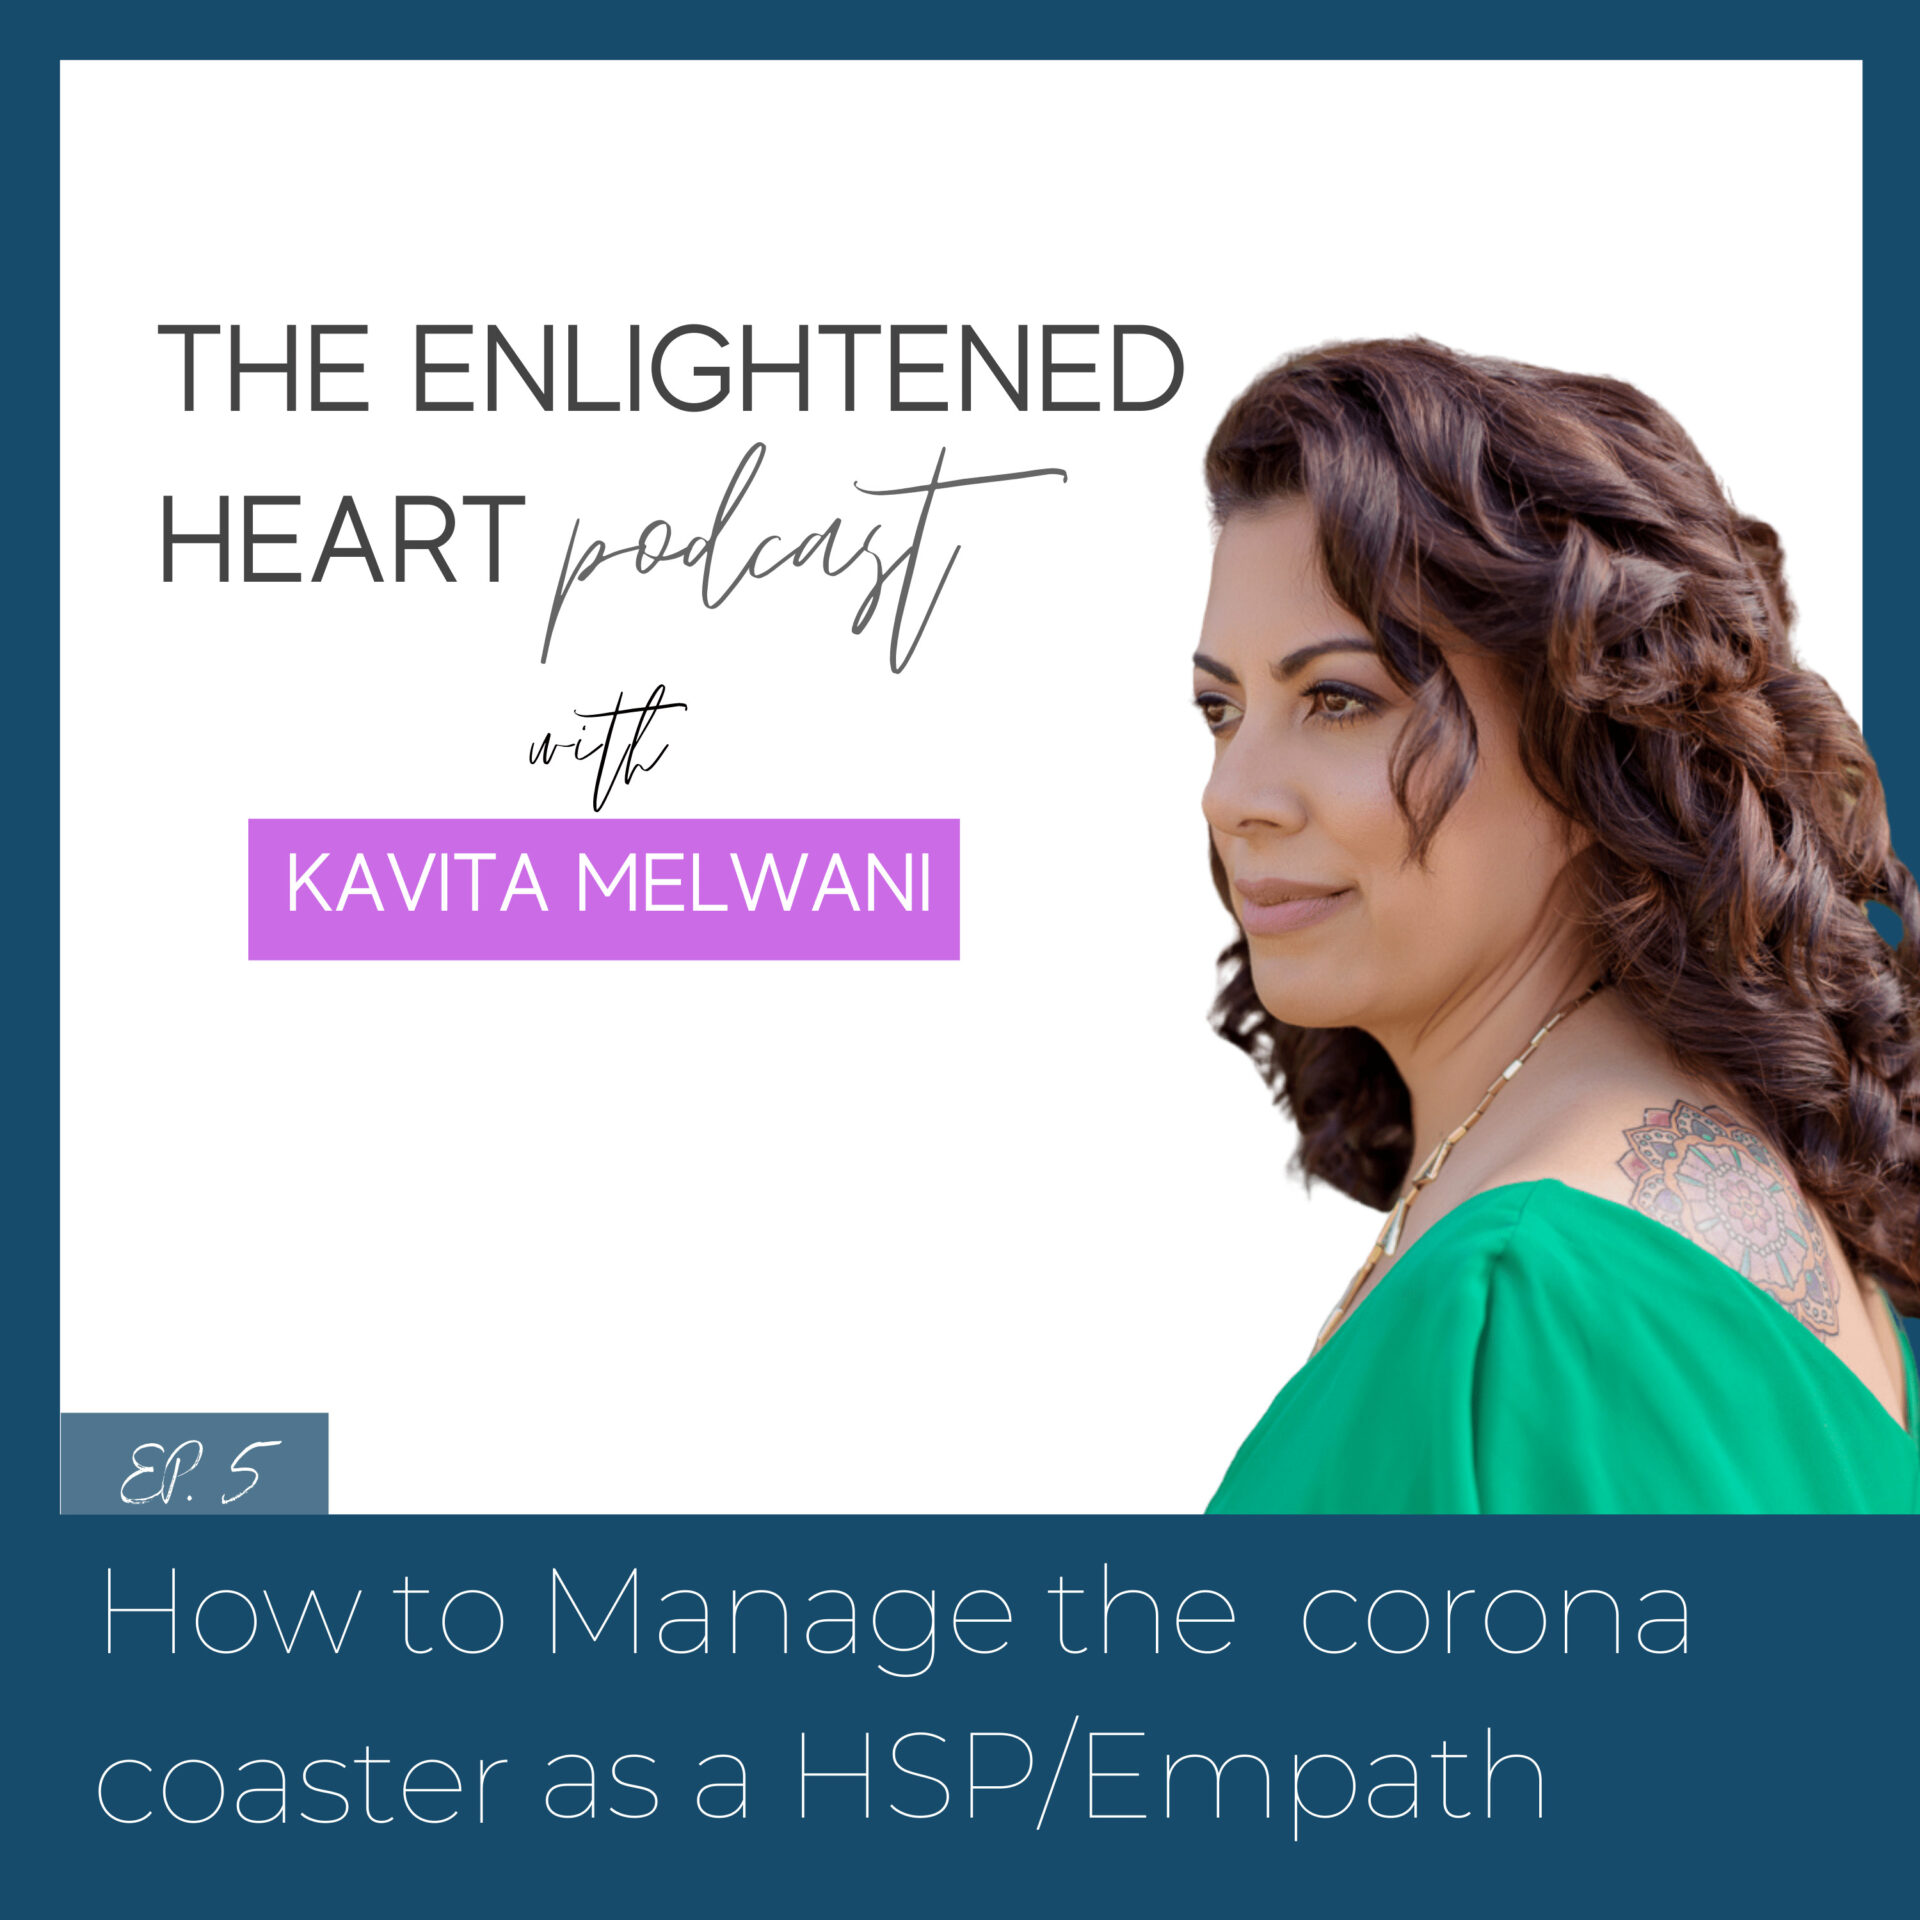 How to Manage the Corona Coaster as an HSP/Empath